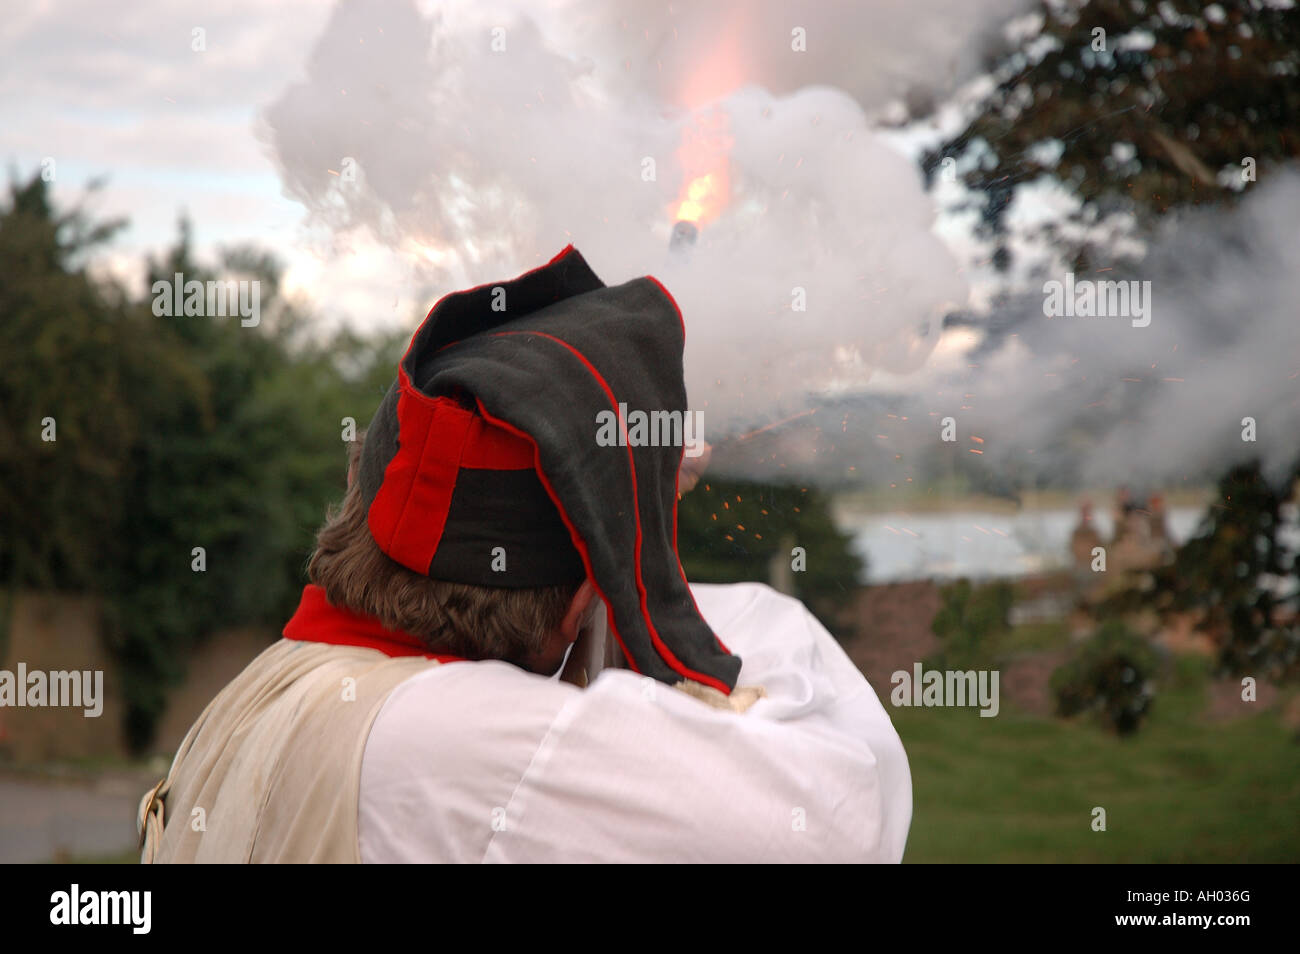 Napoleonic Re-enactment Soldier Firing Musket Stock Photo